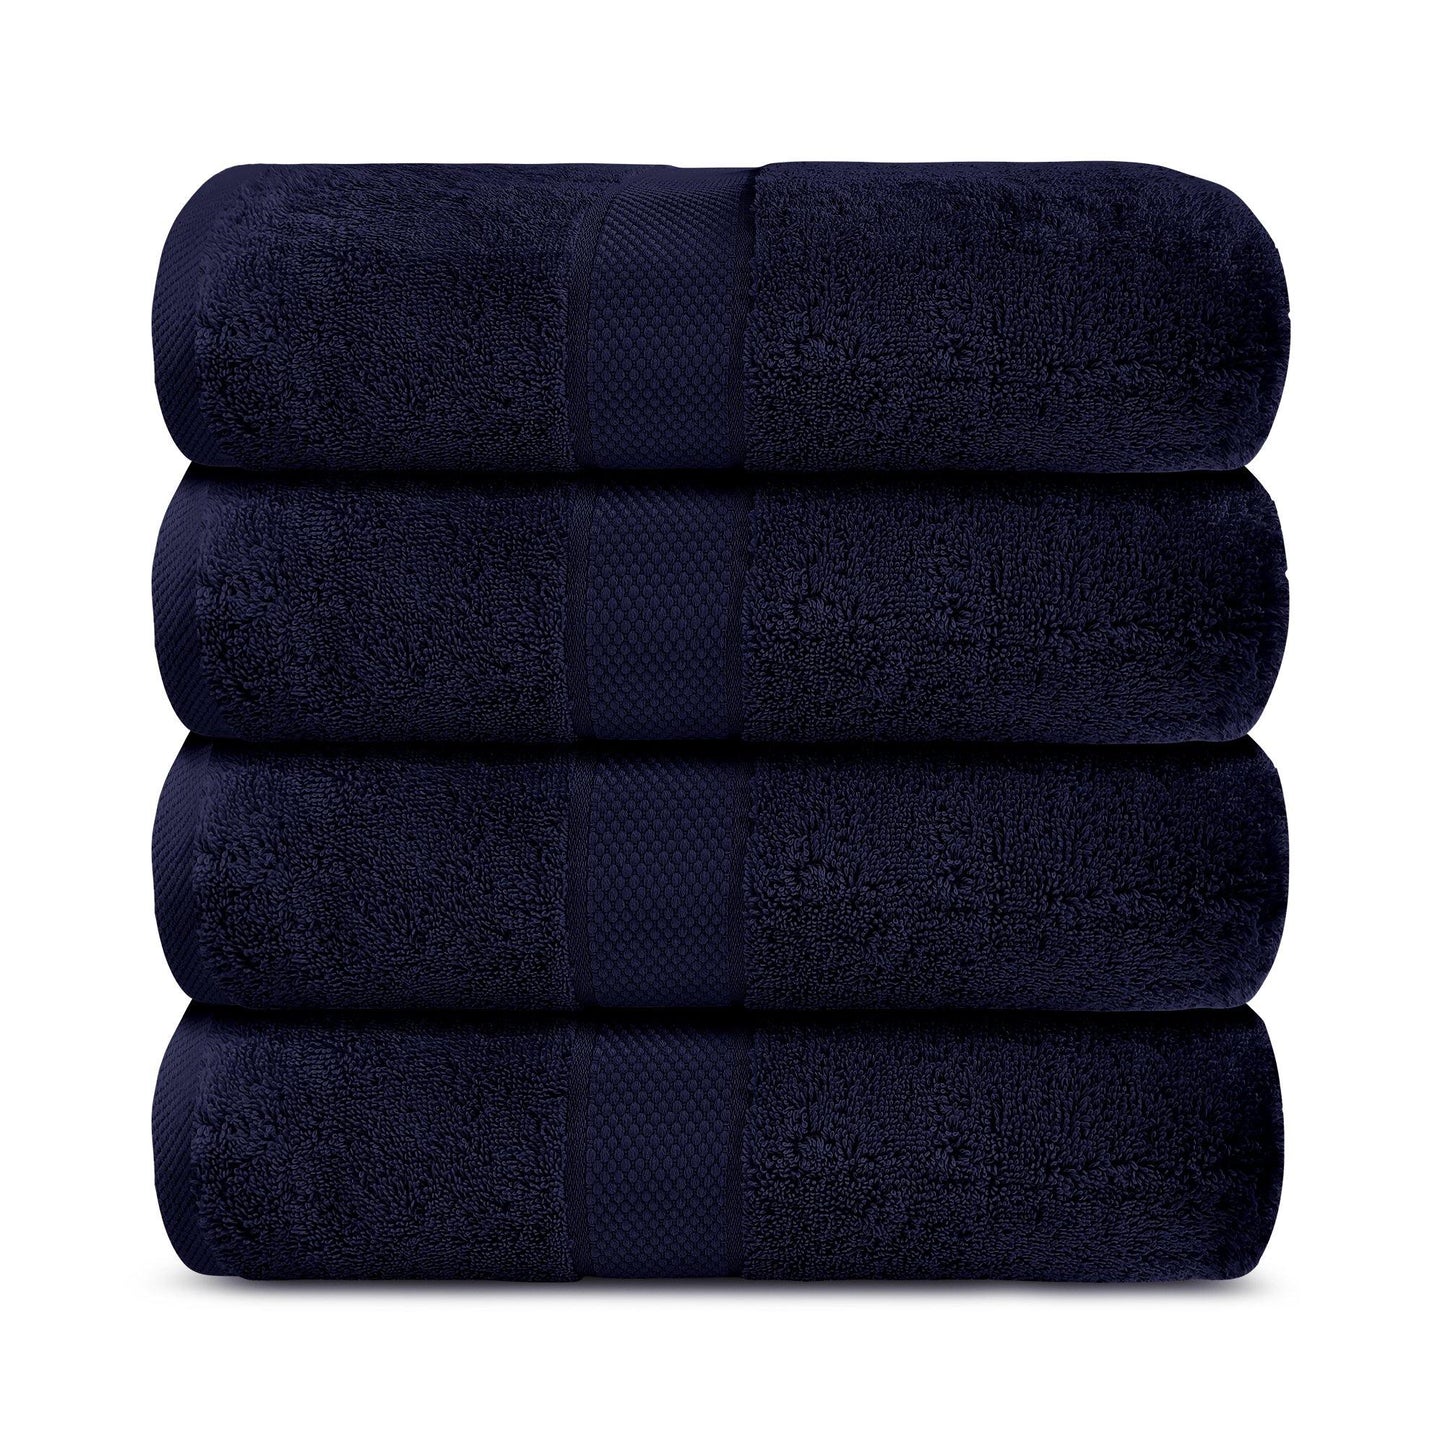 lavish-touch-100-cotton-600-gsm-aerocore-towels-and-sheets